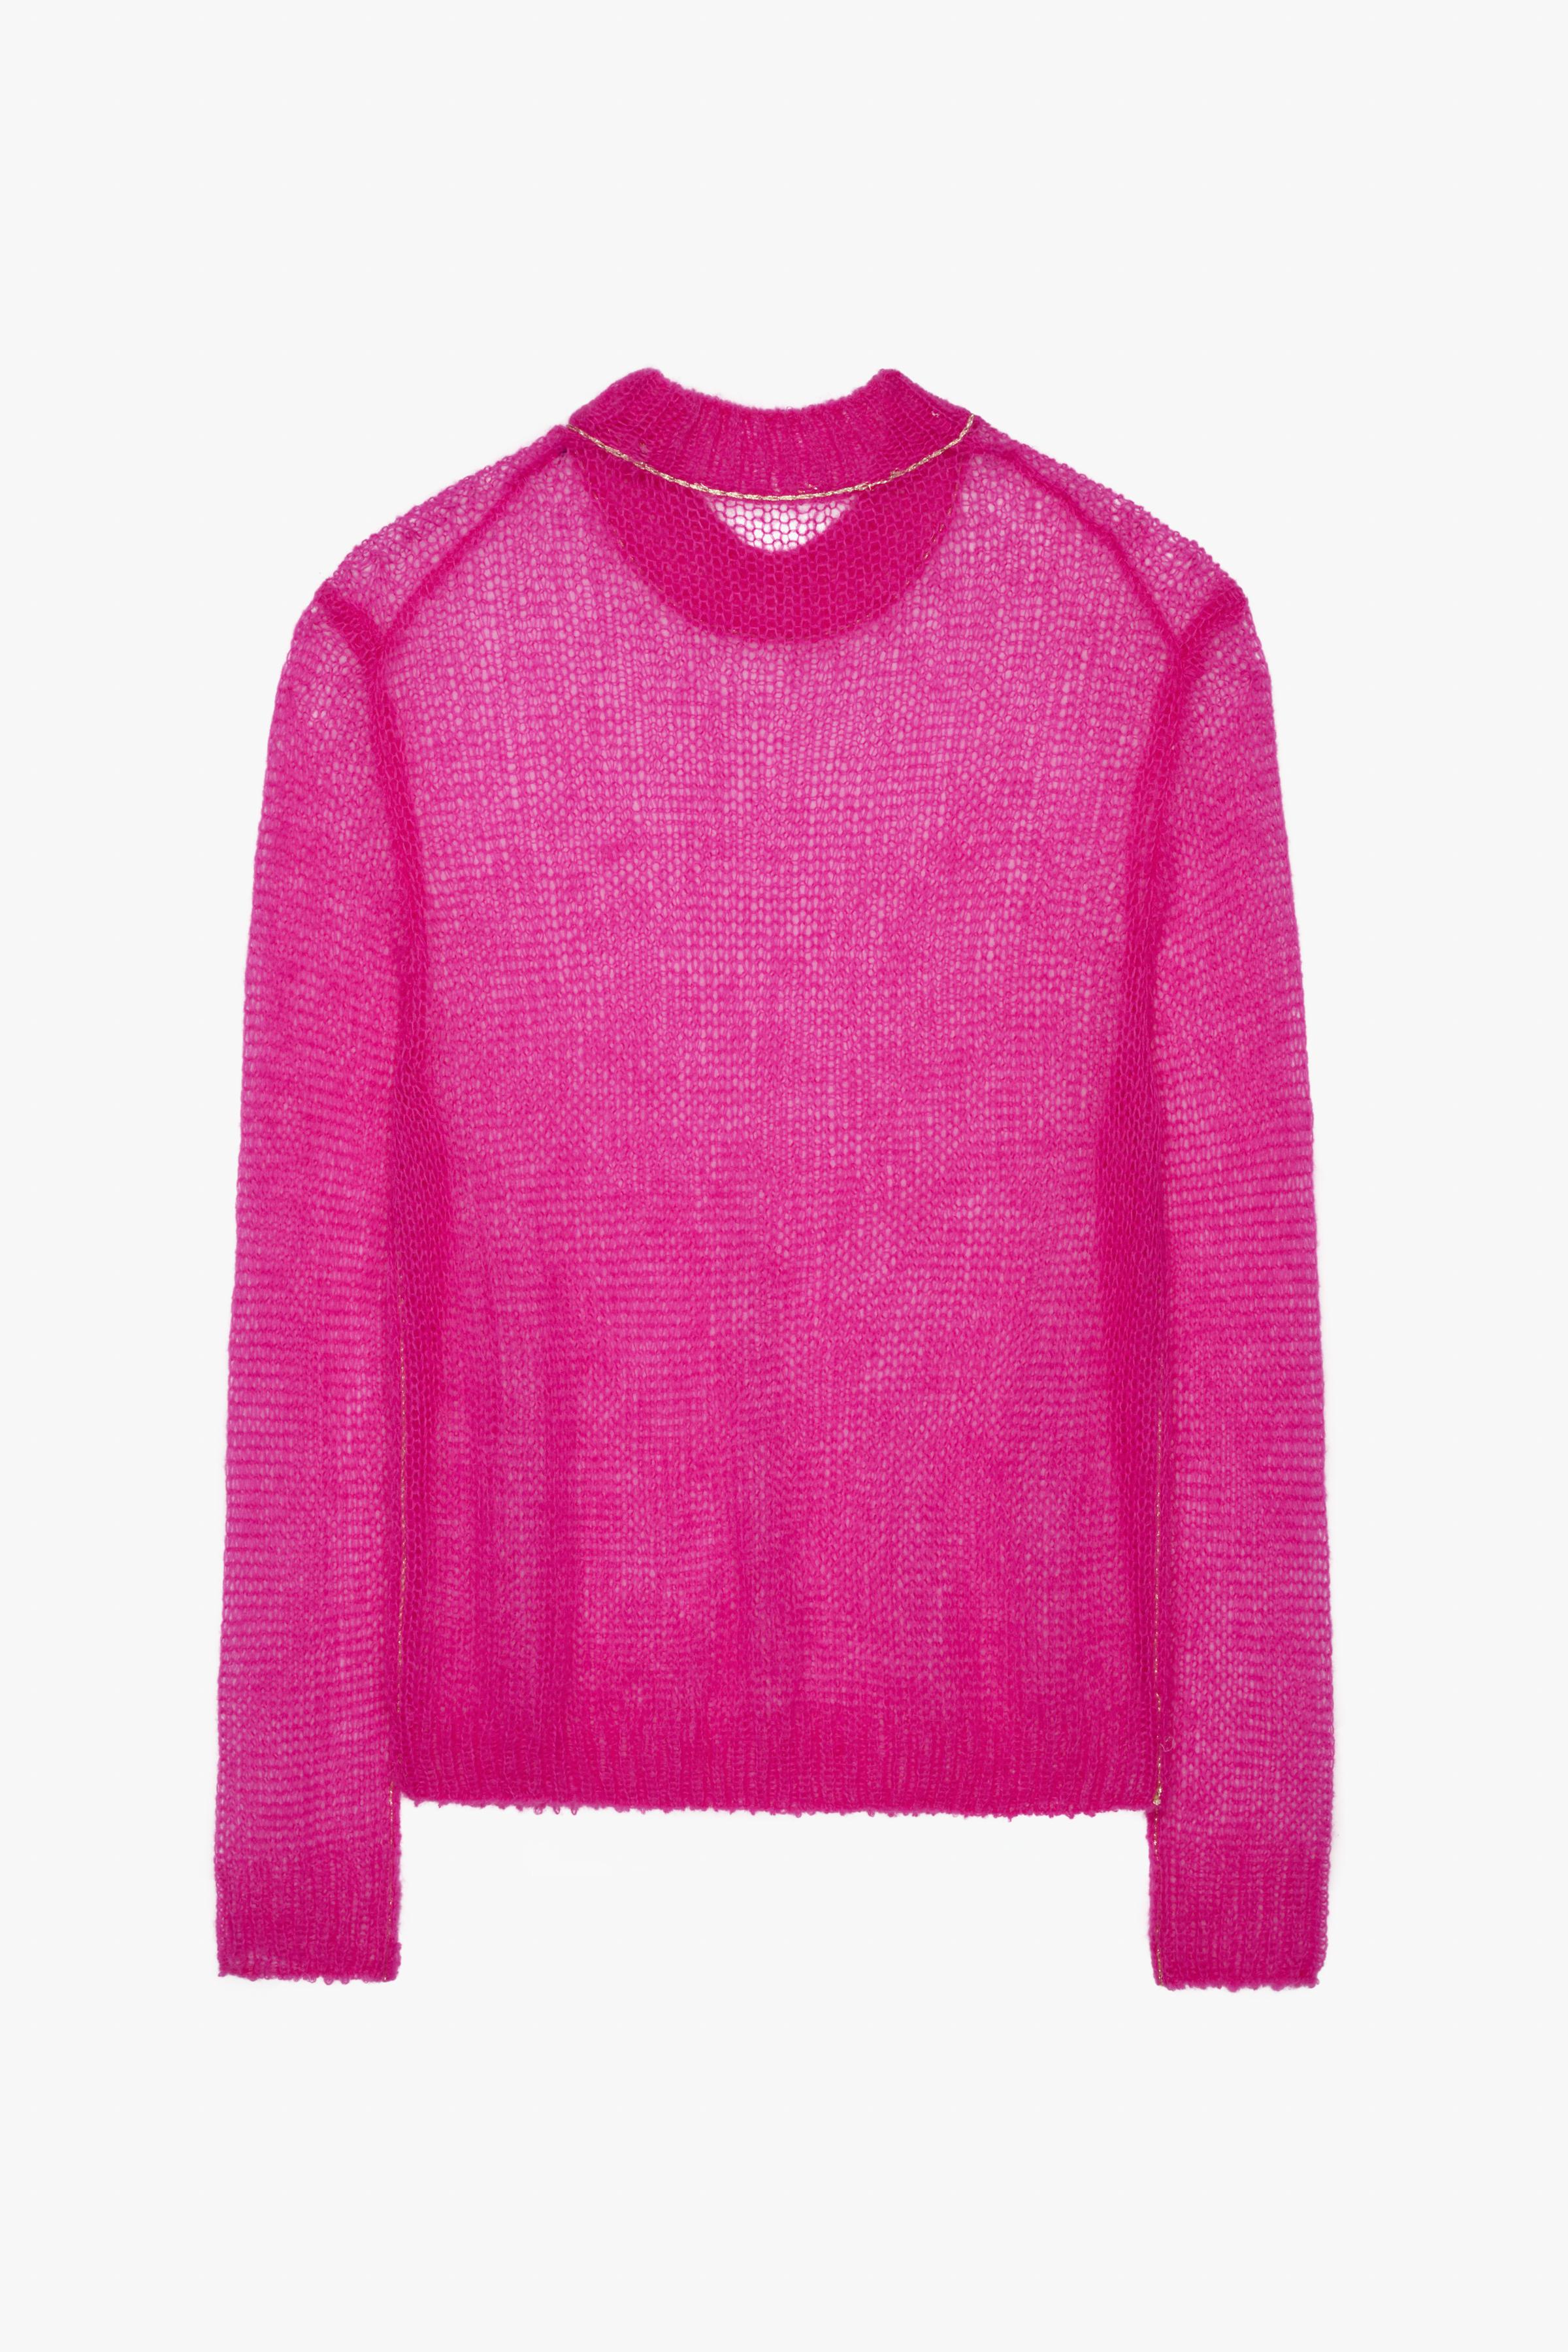 WOOL BLEND OPENWORK KNIT SWEATER LIMITED EDITION